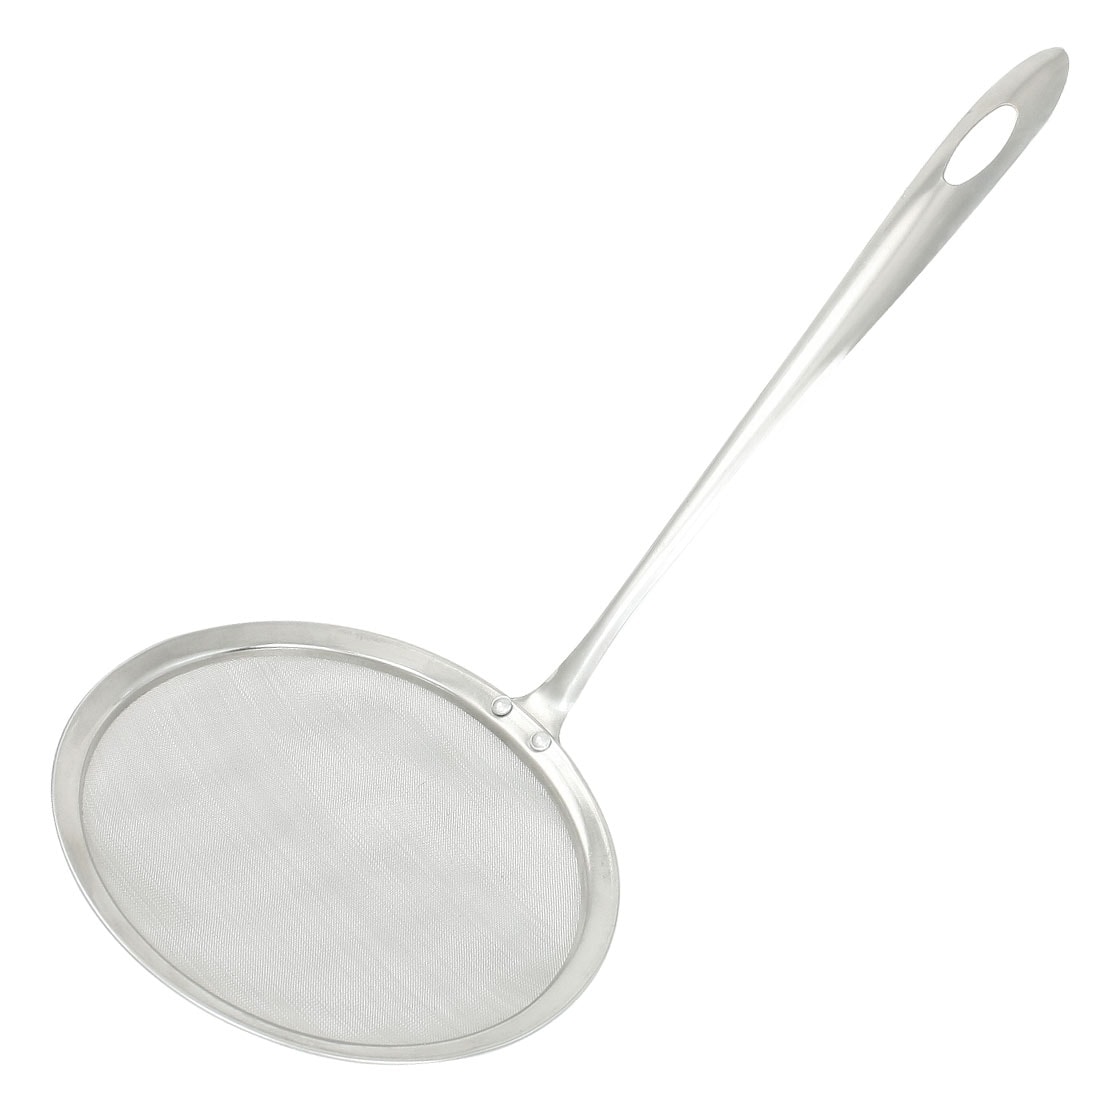 https://ak1.ostkcdn.com/images/products/is/images/direct/fcc9ef650eae4901682c6bef7d61dcf53fc799ce/Kitchen-Stainless-Steel-Oil-Grease-Strainer-Mesh-Ladle-11.8%22-Length.jpg